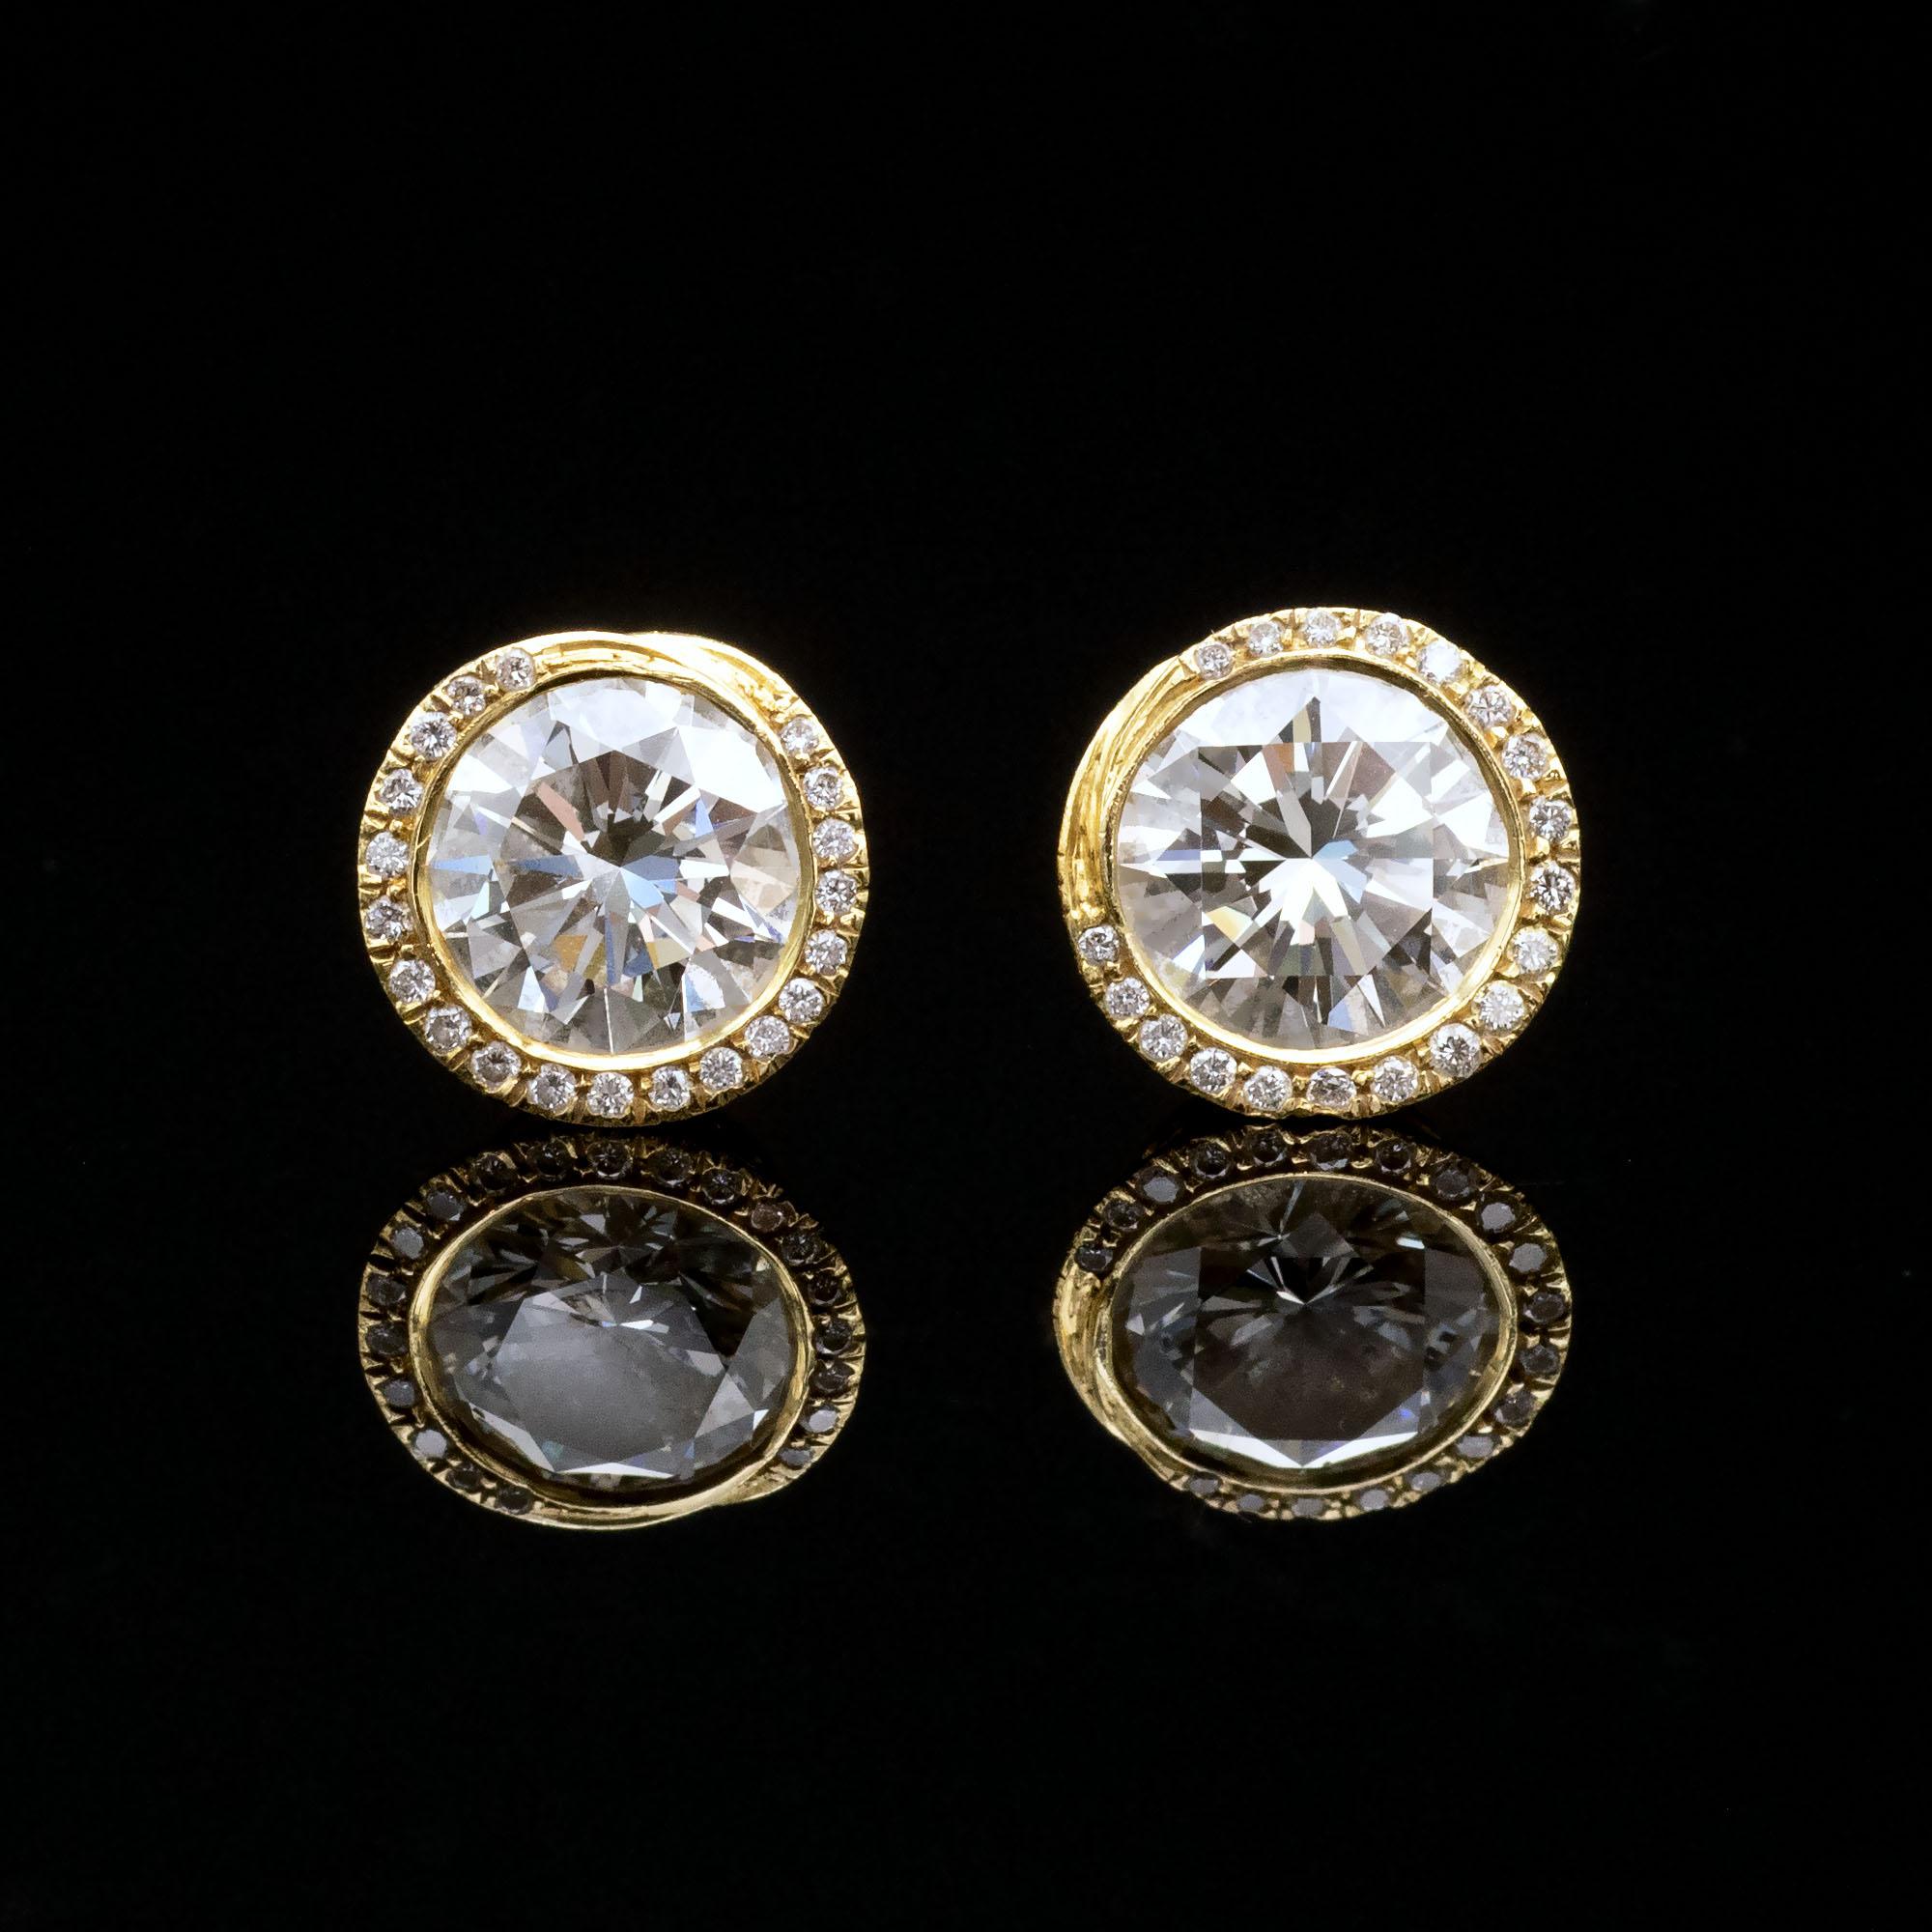 Exquisite nest like 18 karat Gold Diamond stud earrings . These lovely studs are delicately hand made and engraved. Their design although intricate stays simple; it looks like a woven basket holding a round brilliant cut diamond, on its rim a line